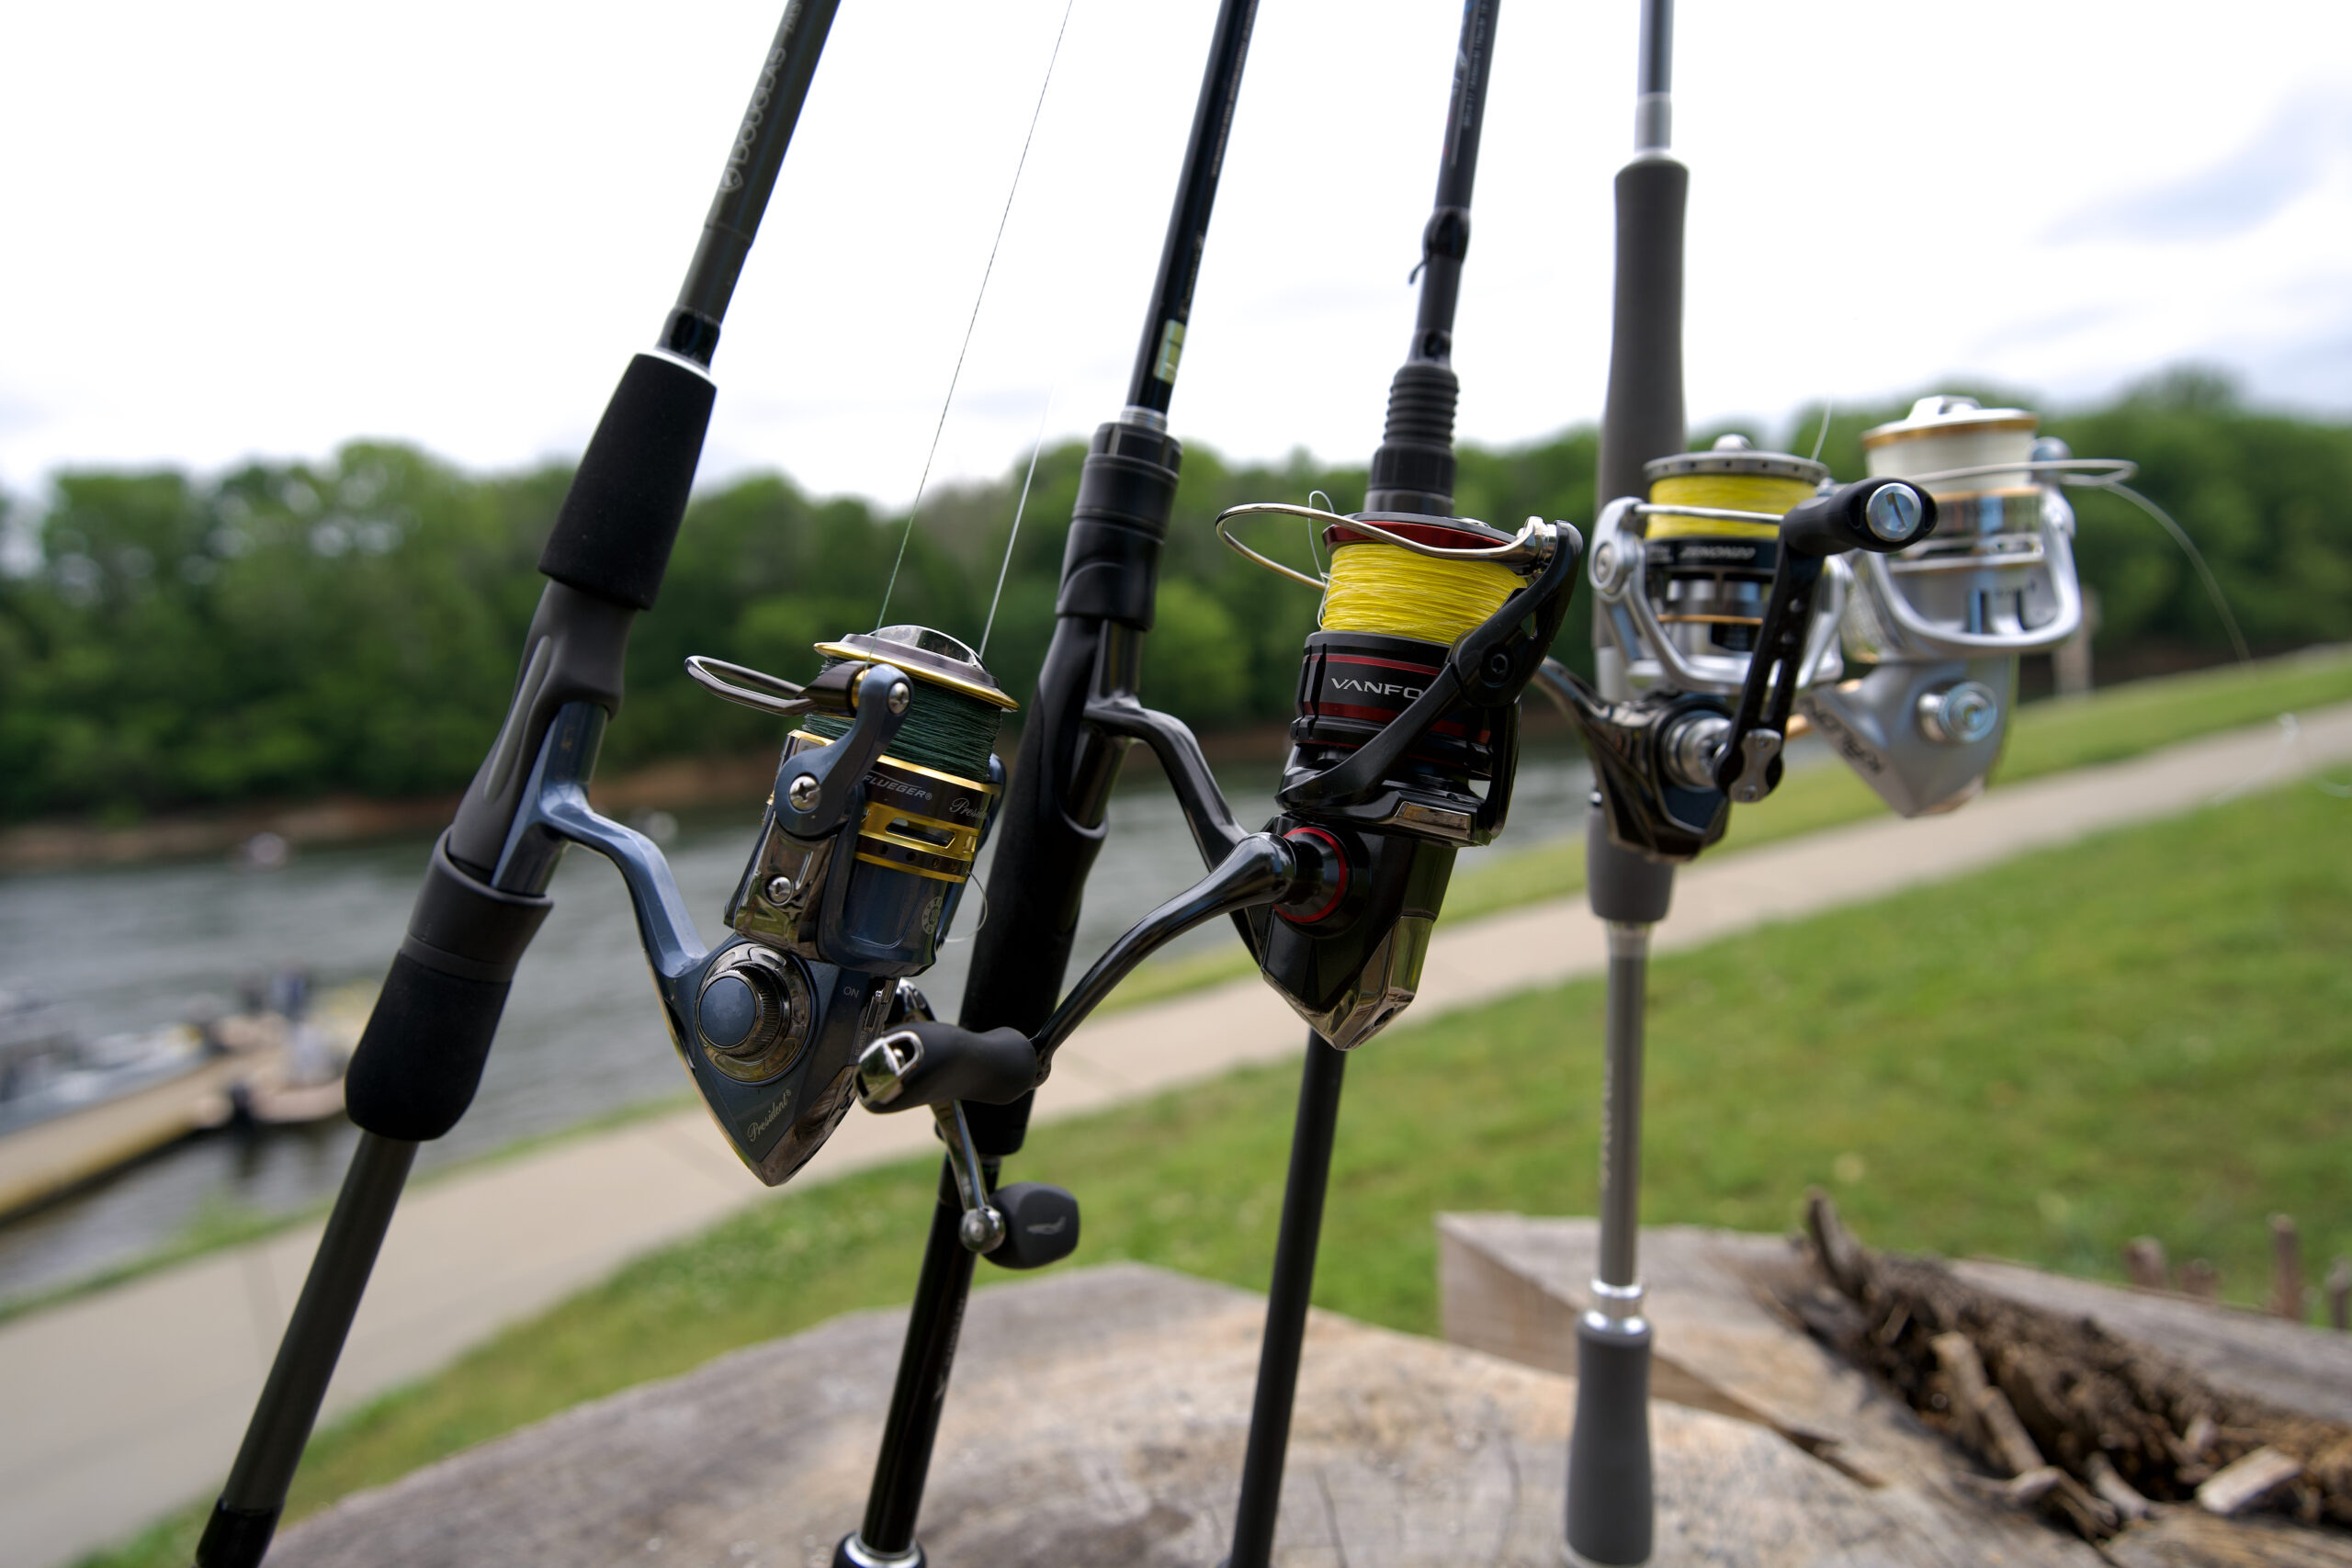 The best spinning rods were tested for their sensitivity, casting distance, and accuracy.